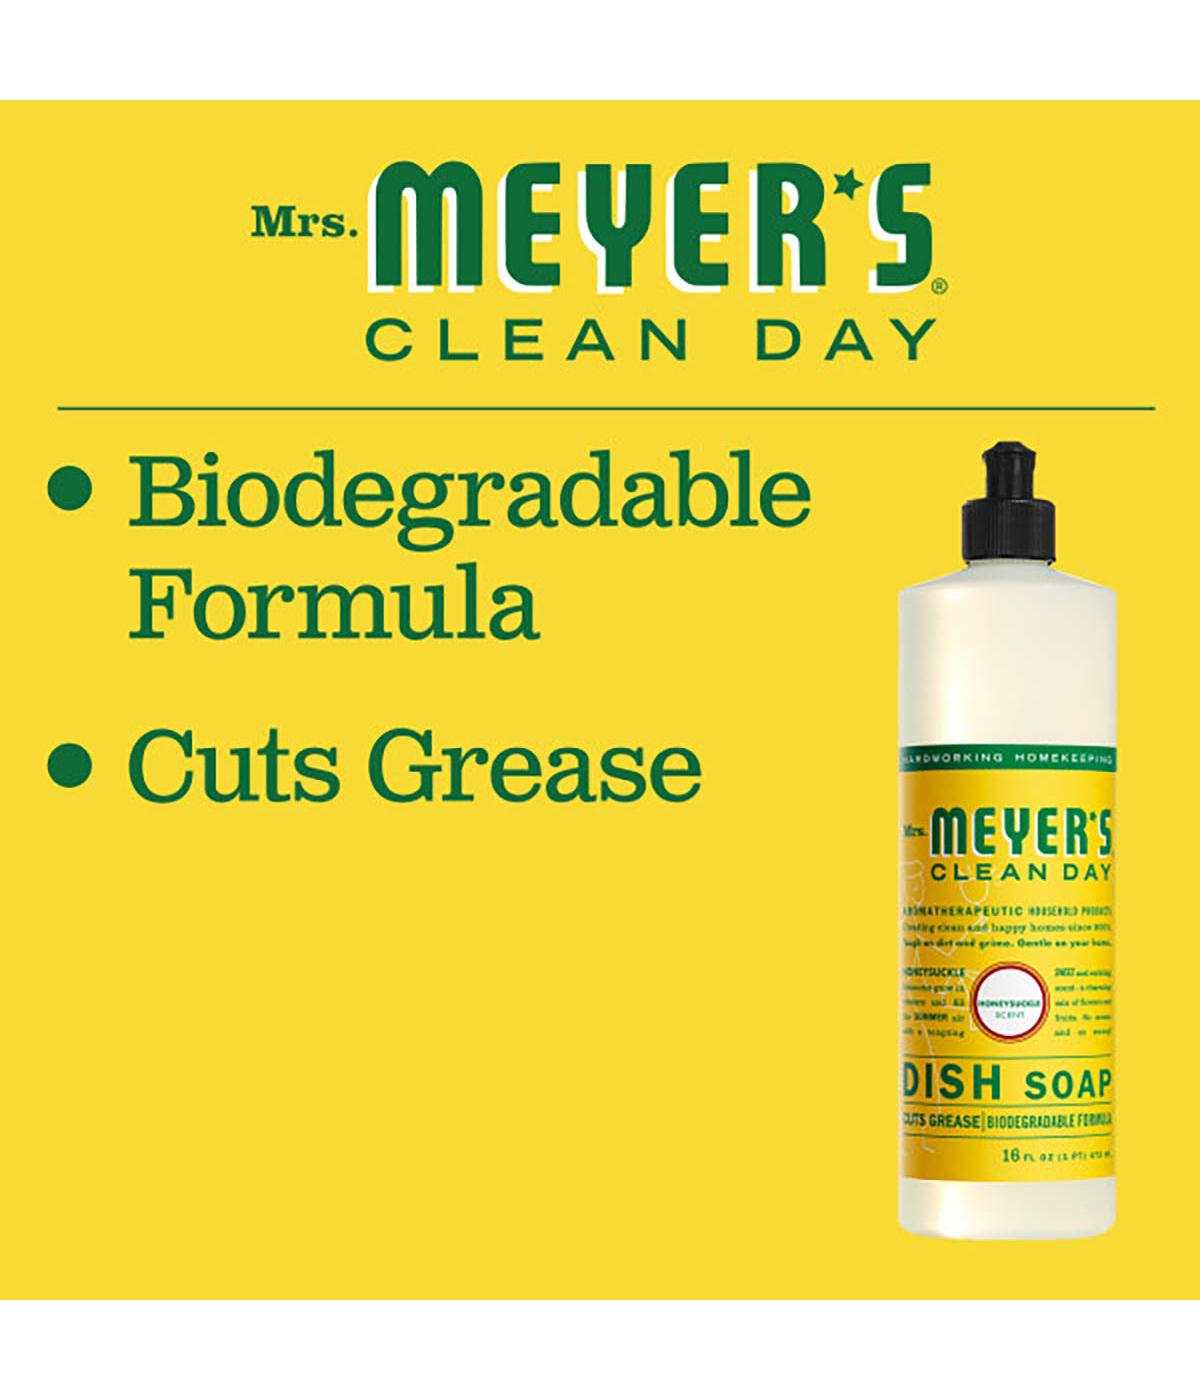 Mrs. Meyer's Clean Day Honeysuckle Scent Dish Soap; image 2 of 2